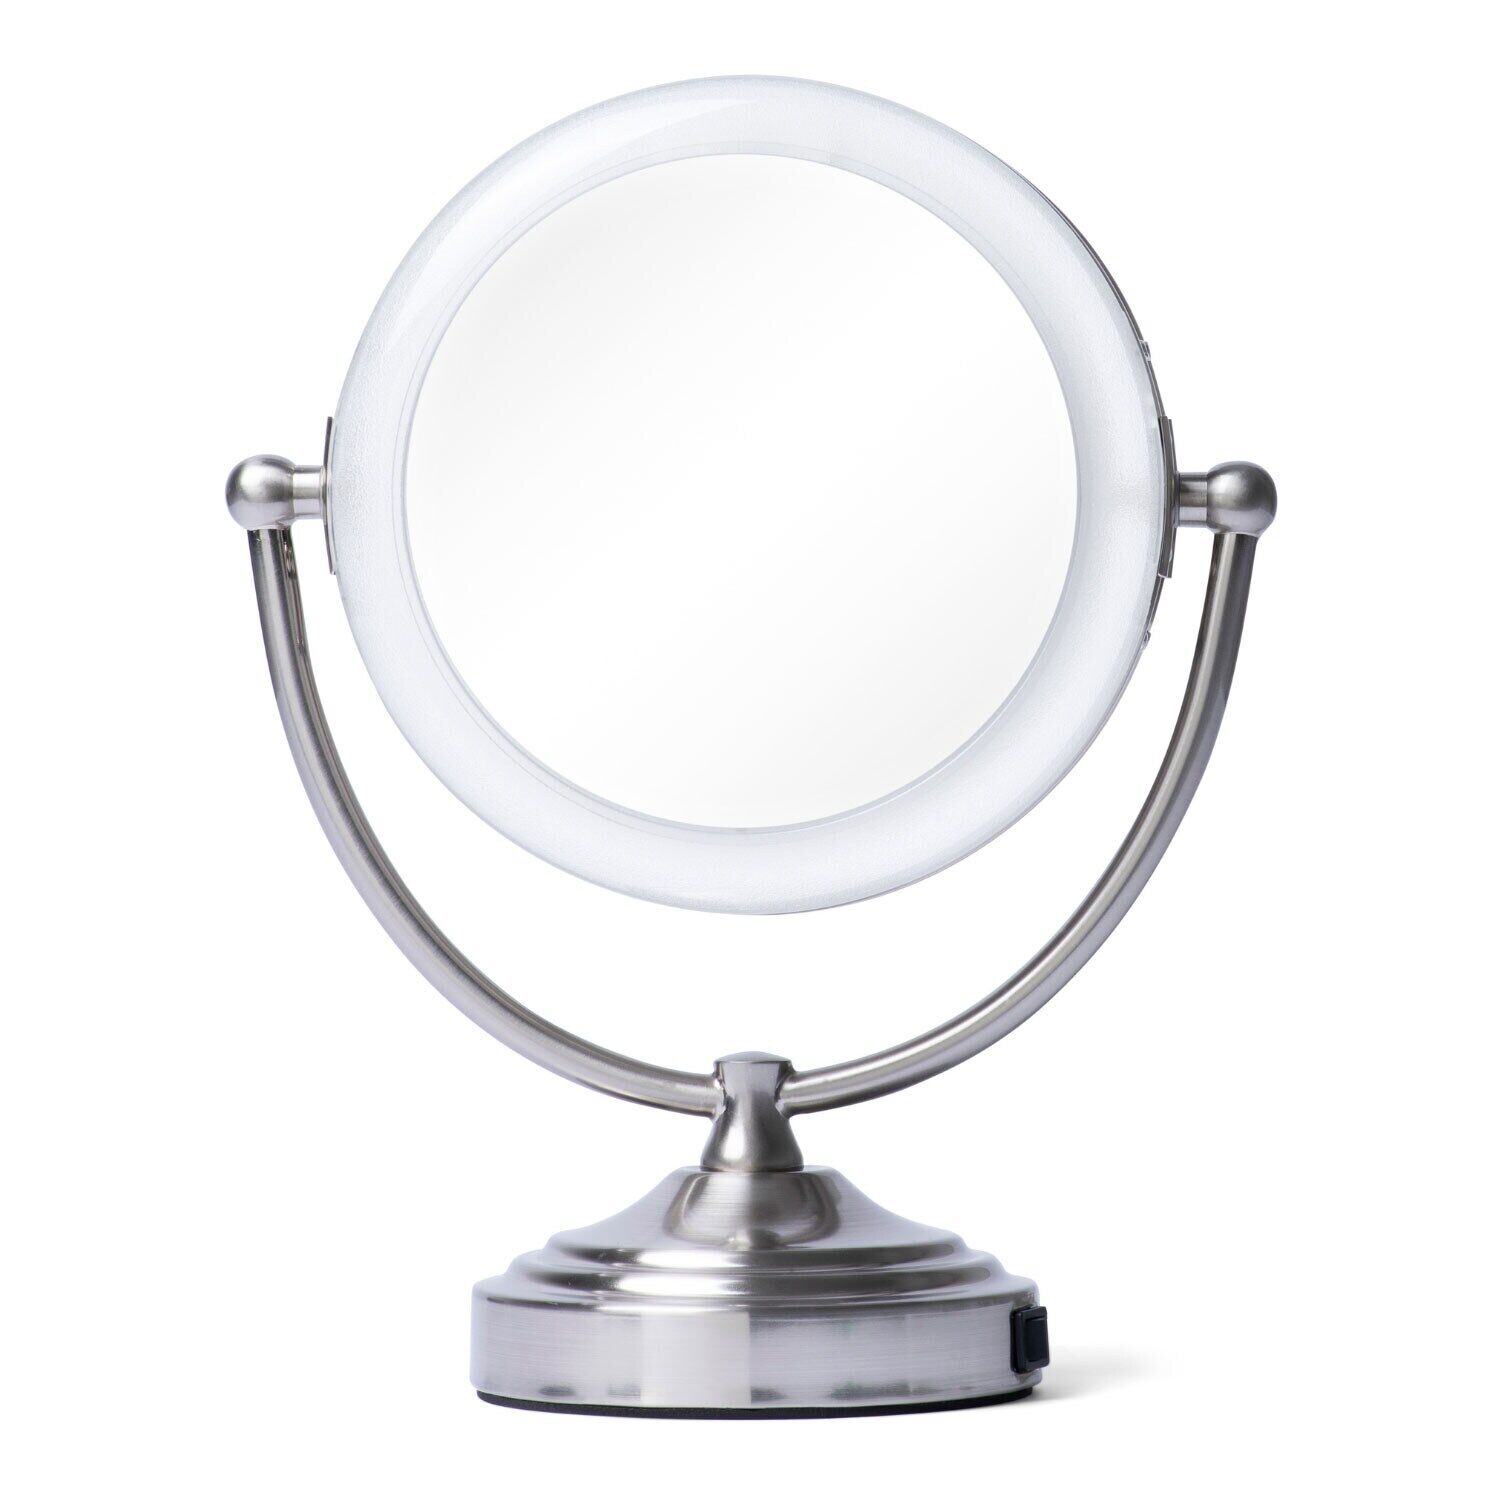 FLOXITE 8X Magnifying Mirror with Light Pro-Size Large Make-Up Mirror, Chrome